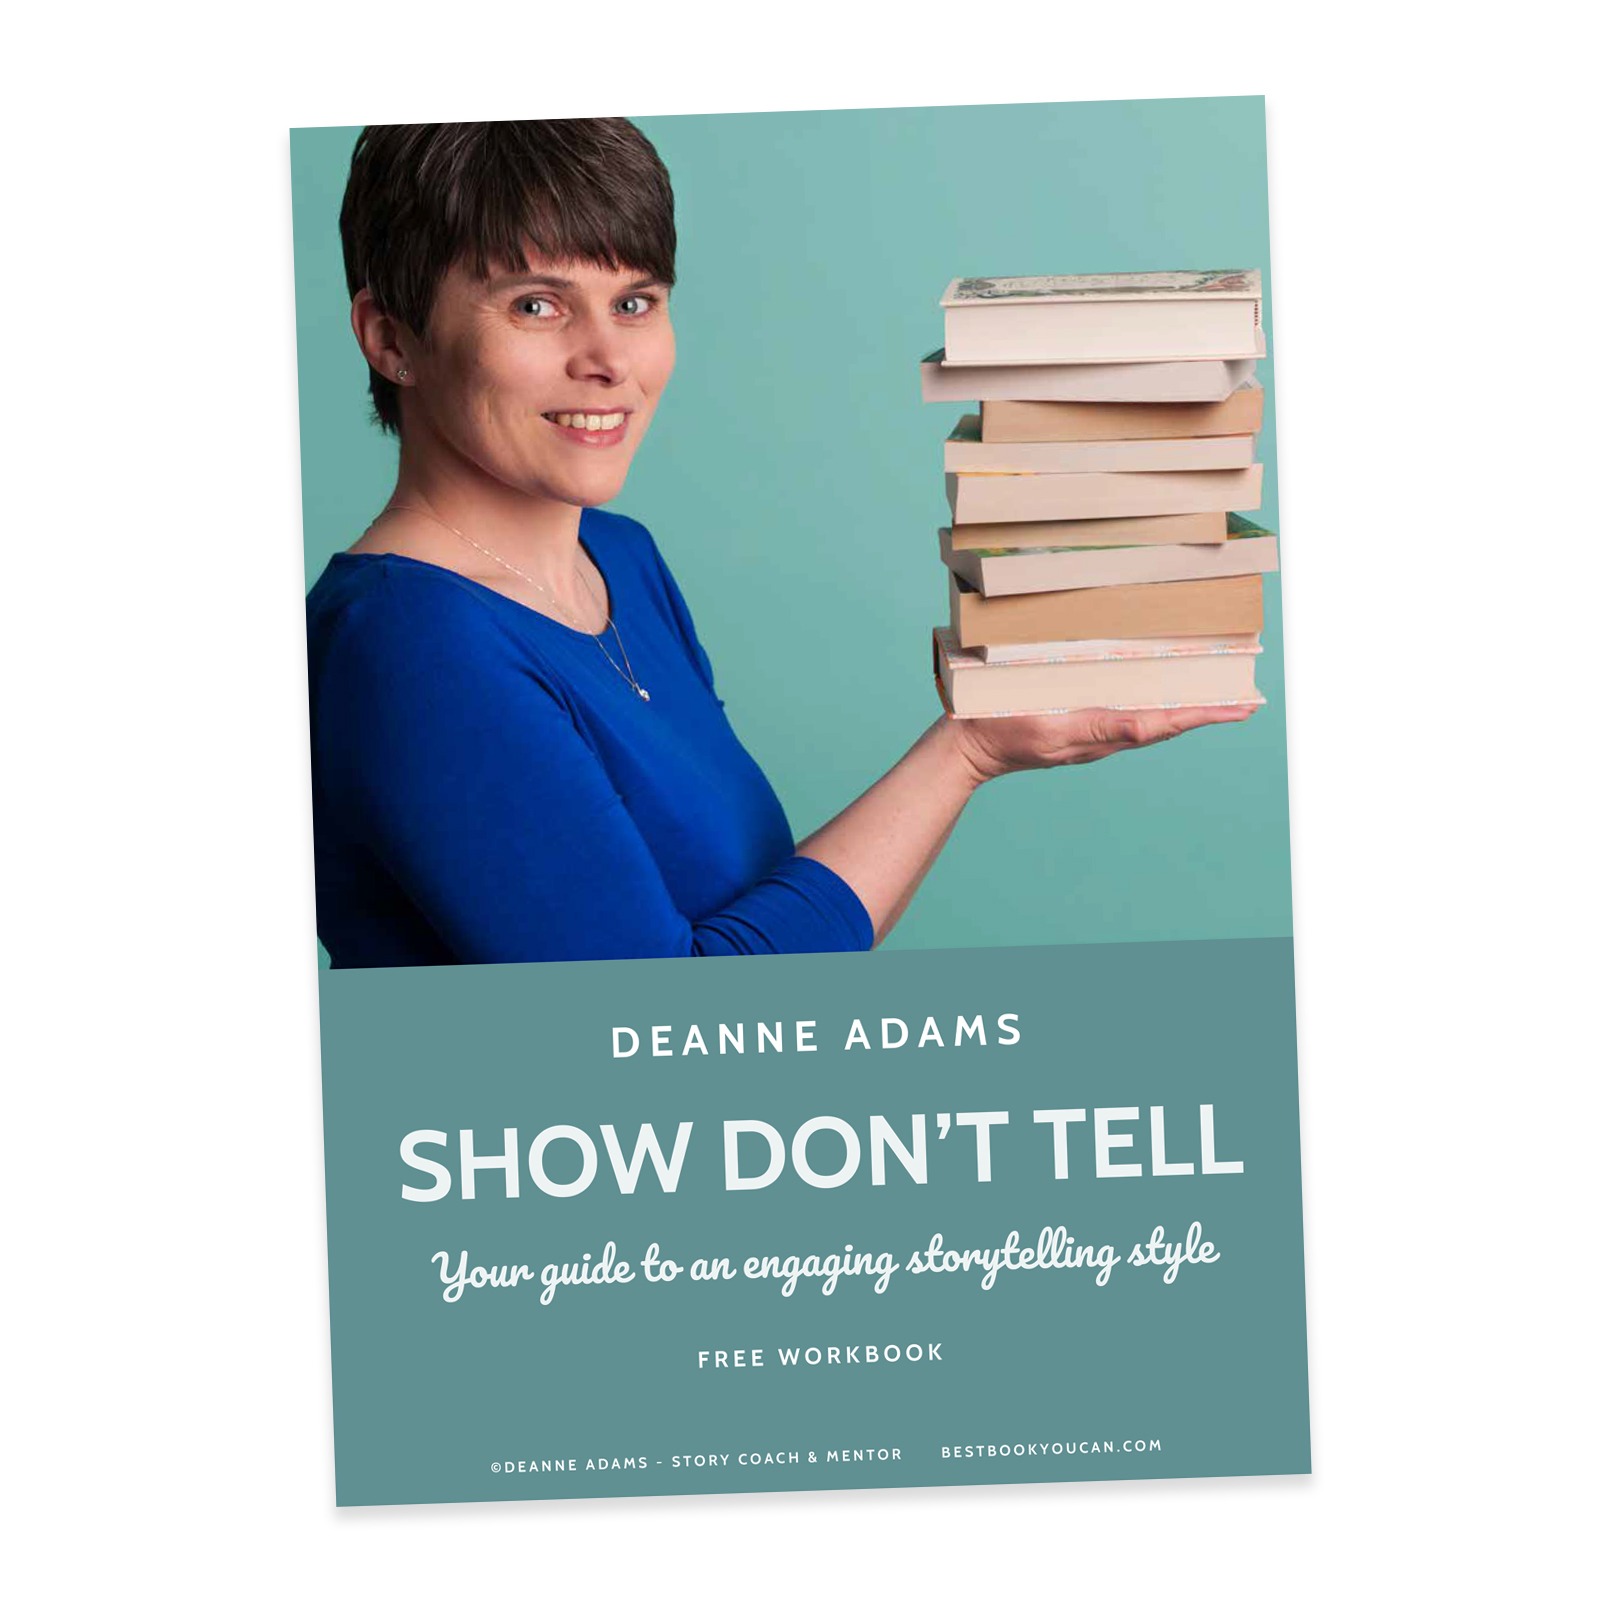 Show don't tell free workbook